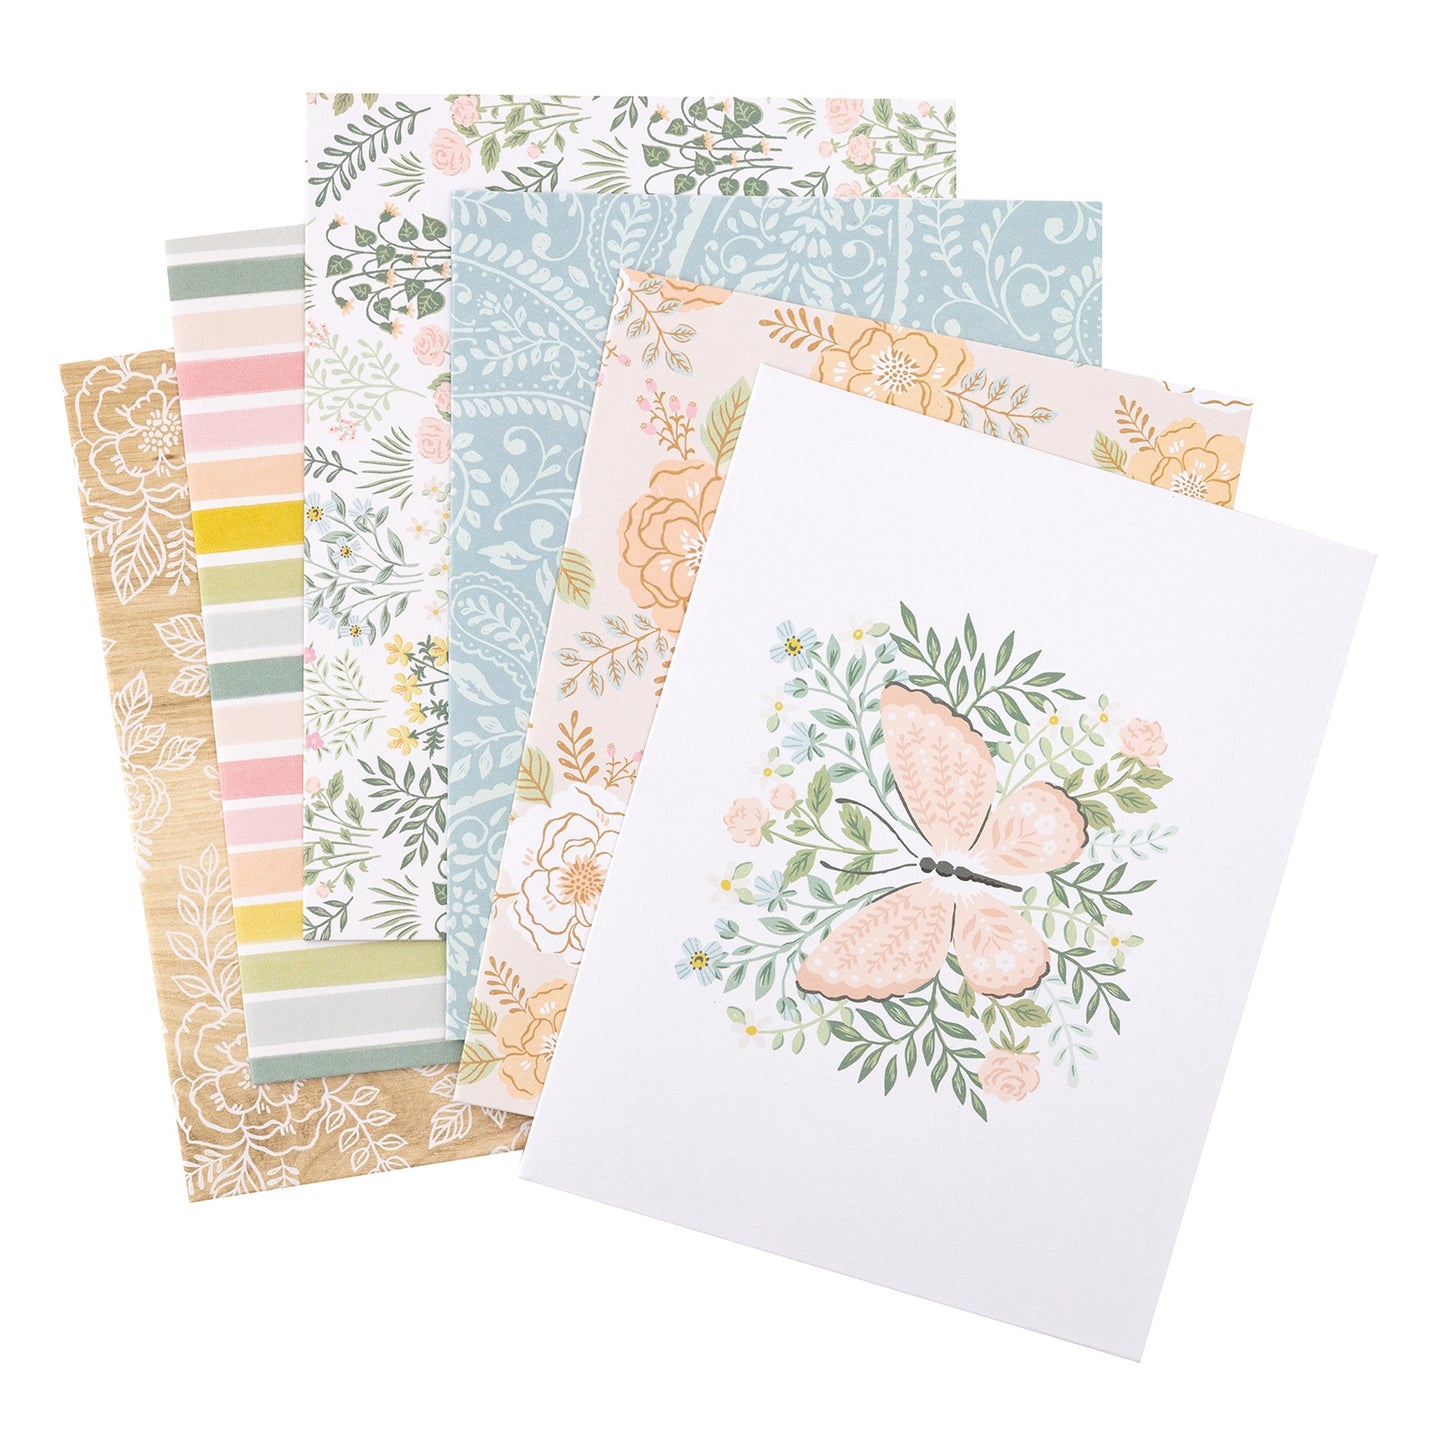 Crate Paper A2 Cards W/Envelopes (4.375"X5.75") 40/Box-Gingham Garden